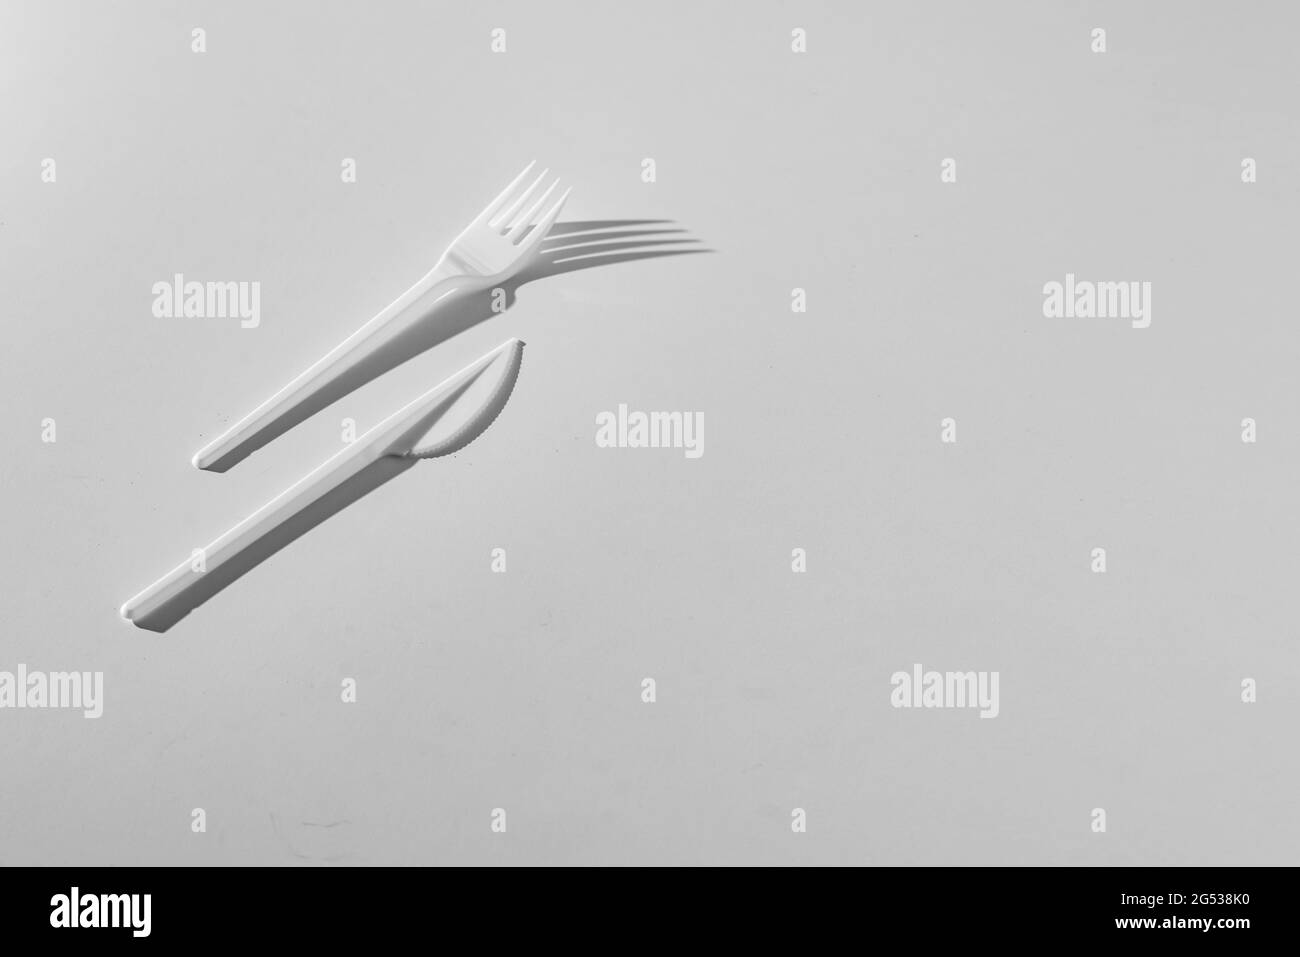 top view conceptual minimalism with plastic table utensil tablewear cultery Stock Photo